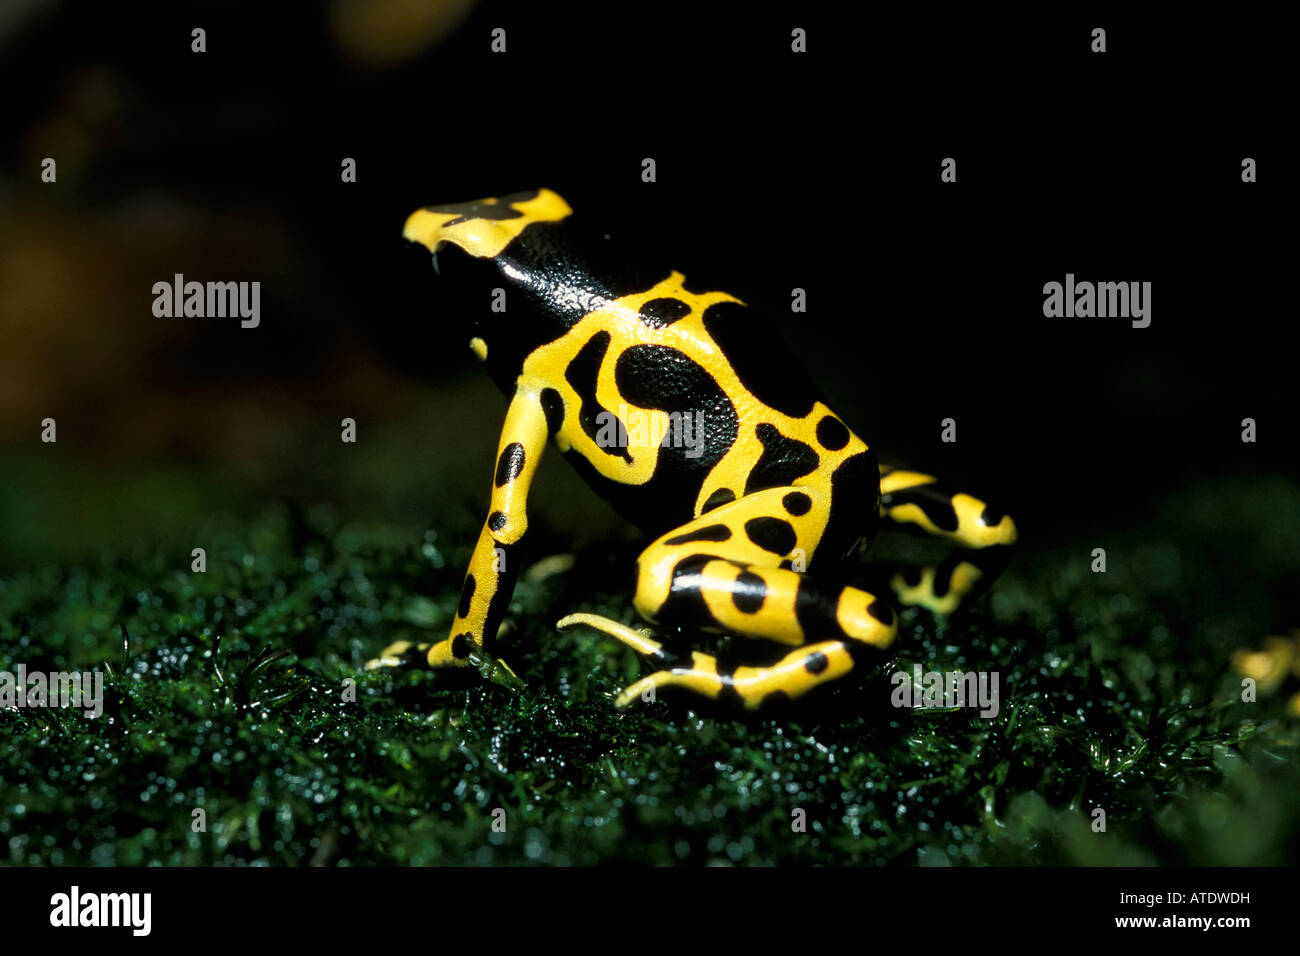 Poison arrow frog Dendrobates auratus Central and South America c Stock Photo